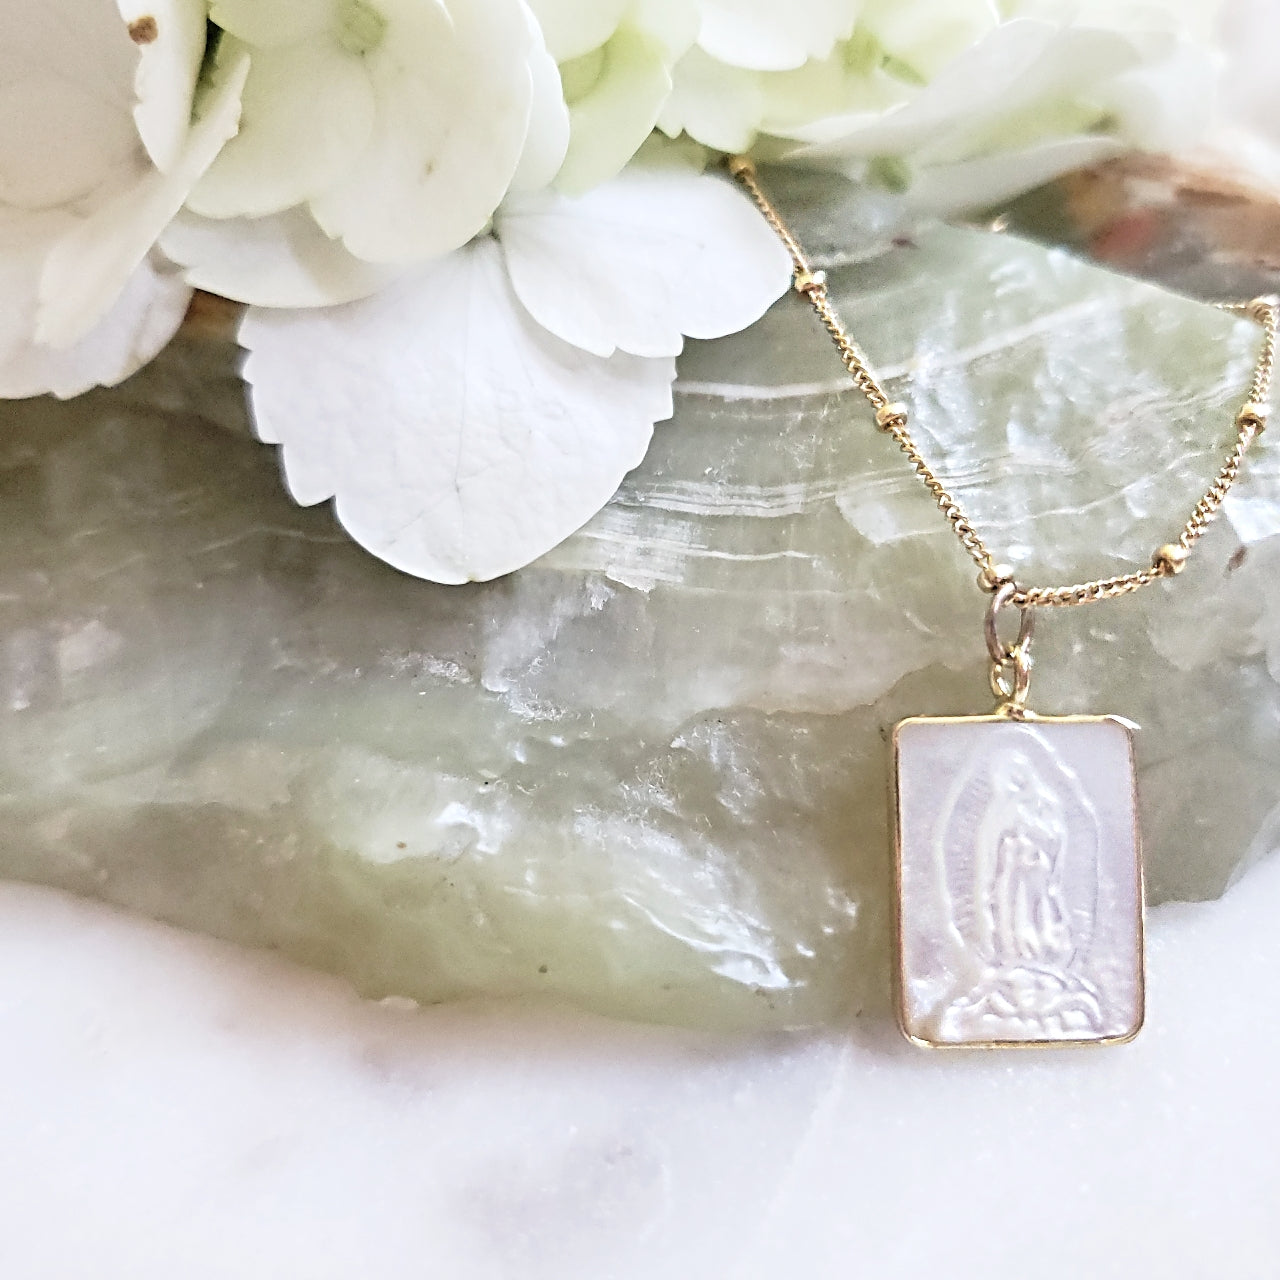 BEHOLD MARY WWP Necklace (limited)